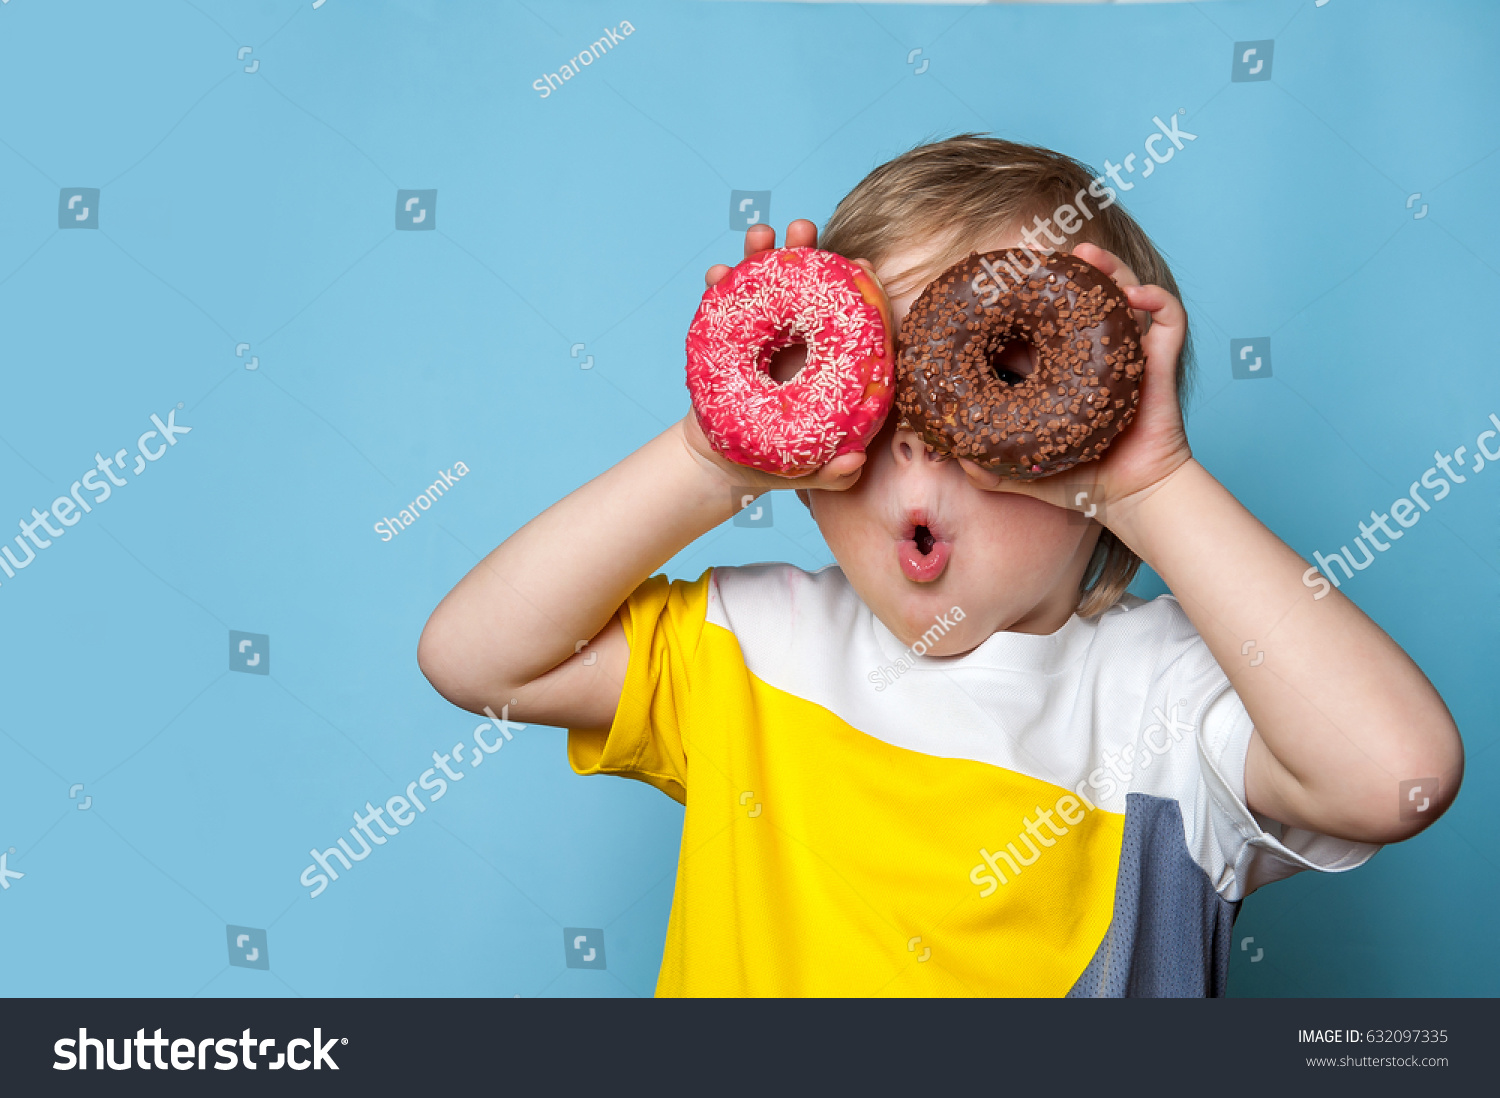 Little happy cute boy is eating donut on blue background wall. child is having fun with donut. Tasty food for kids. Funny time at home with sweet food. Bright kid. #632097335